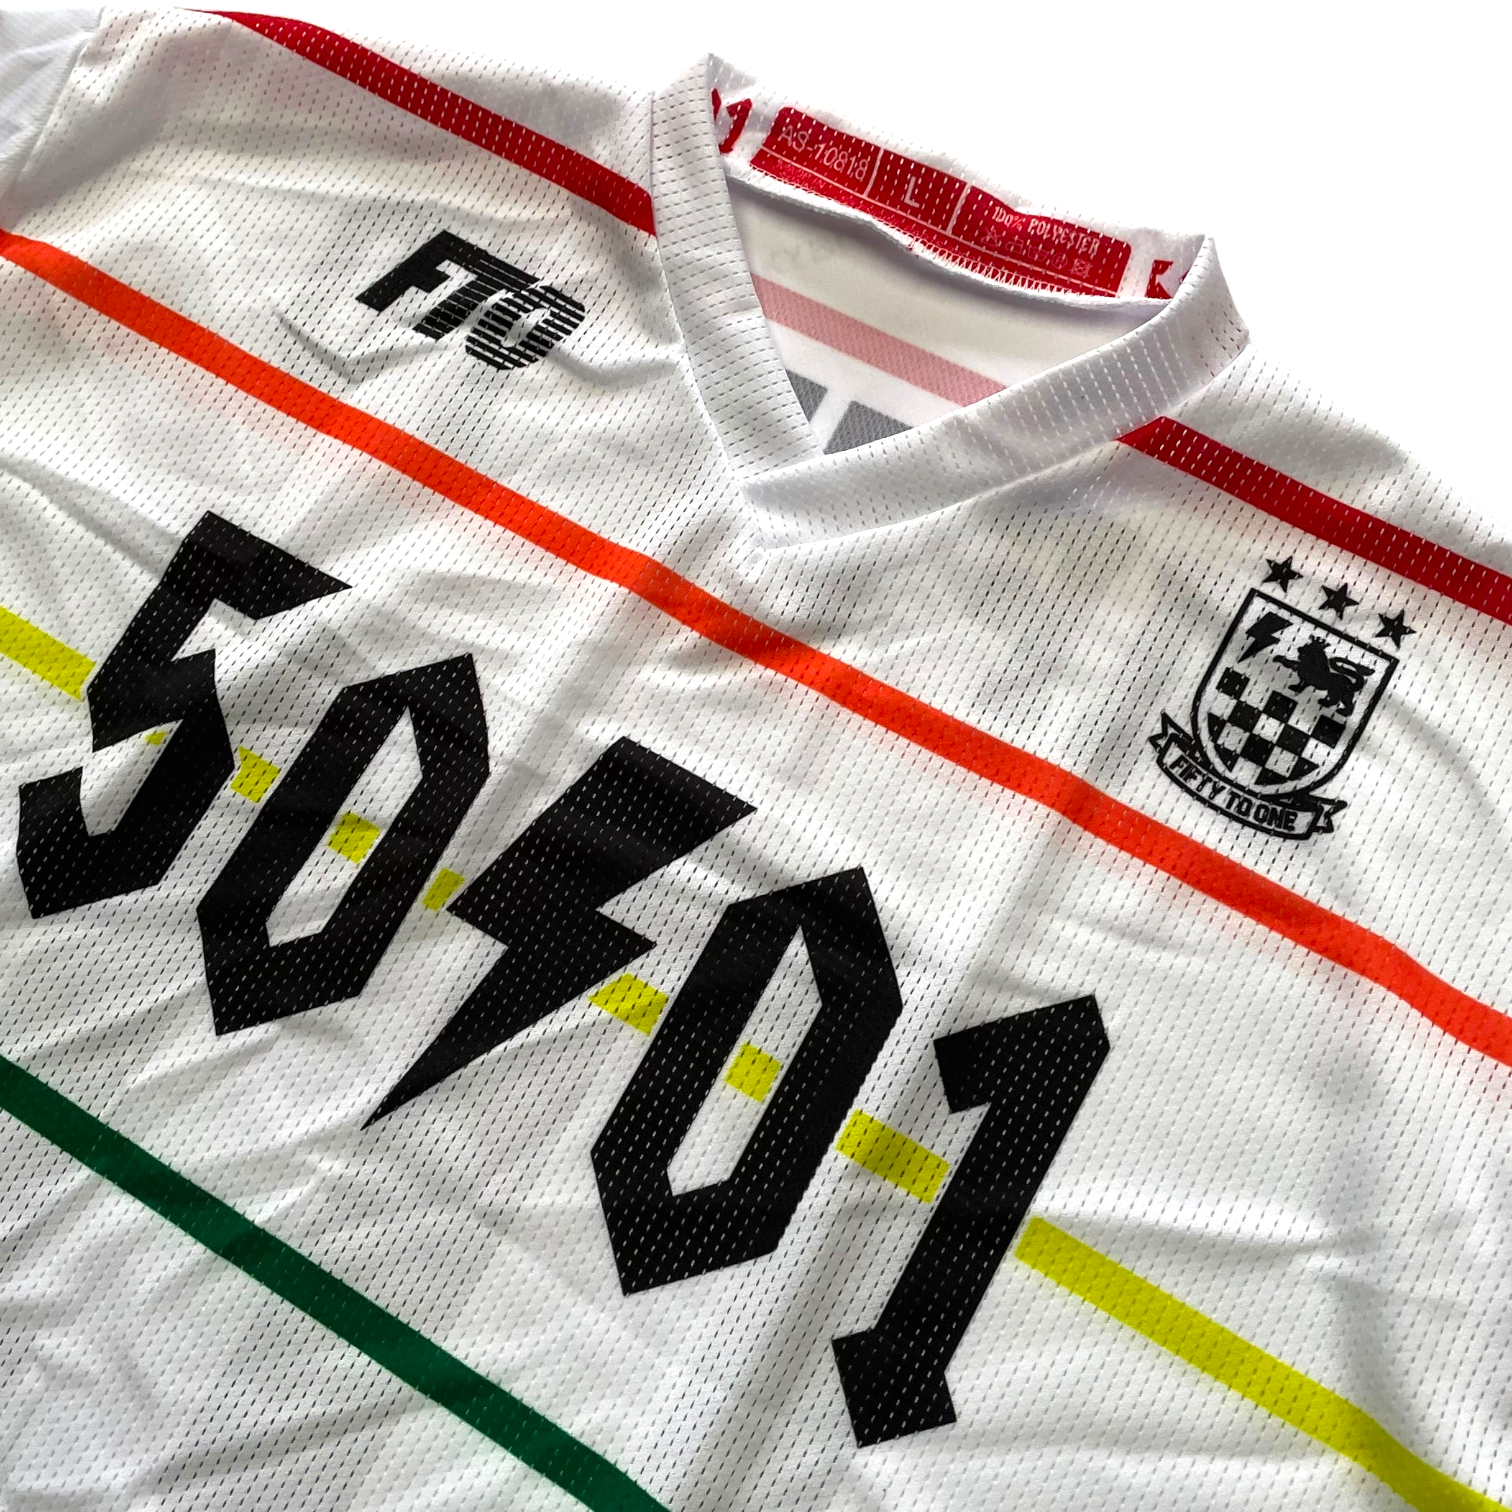 50to01 - FIFTY FC MTB LONGSLEEVE JERSEY WHITE